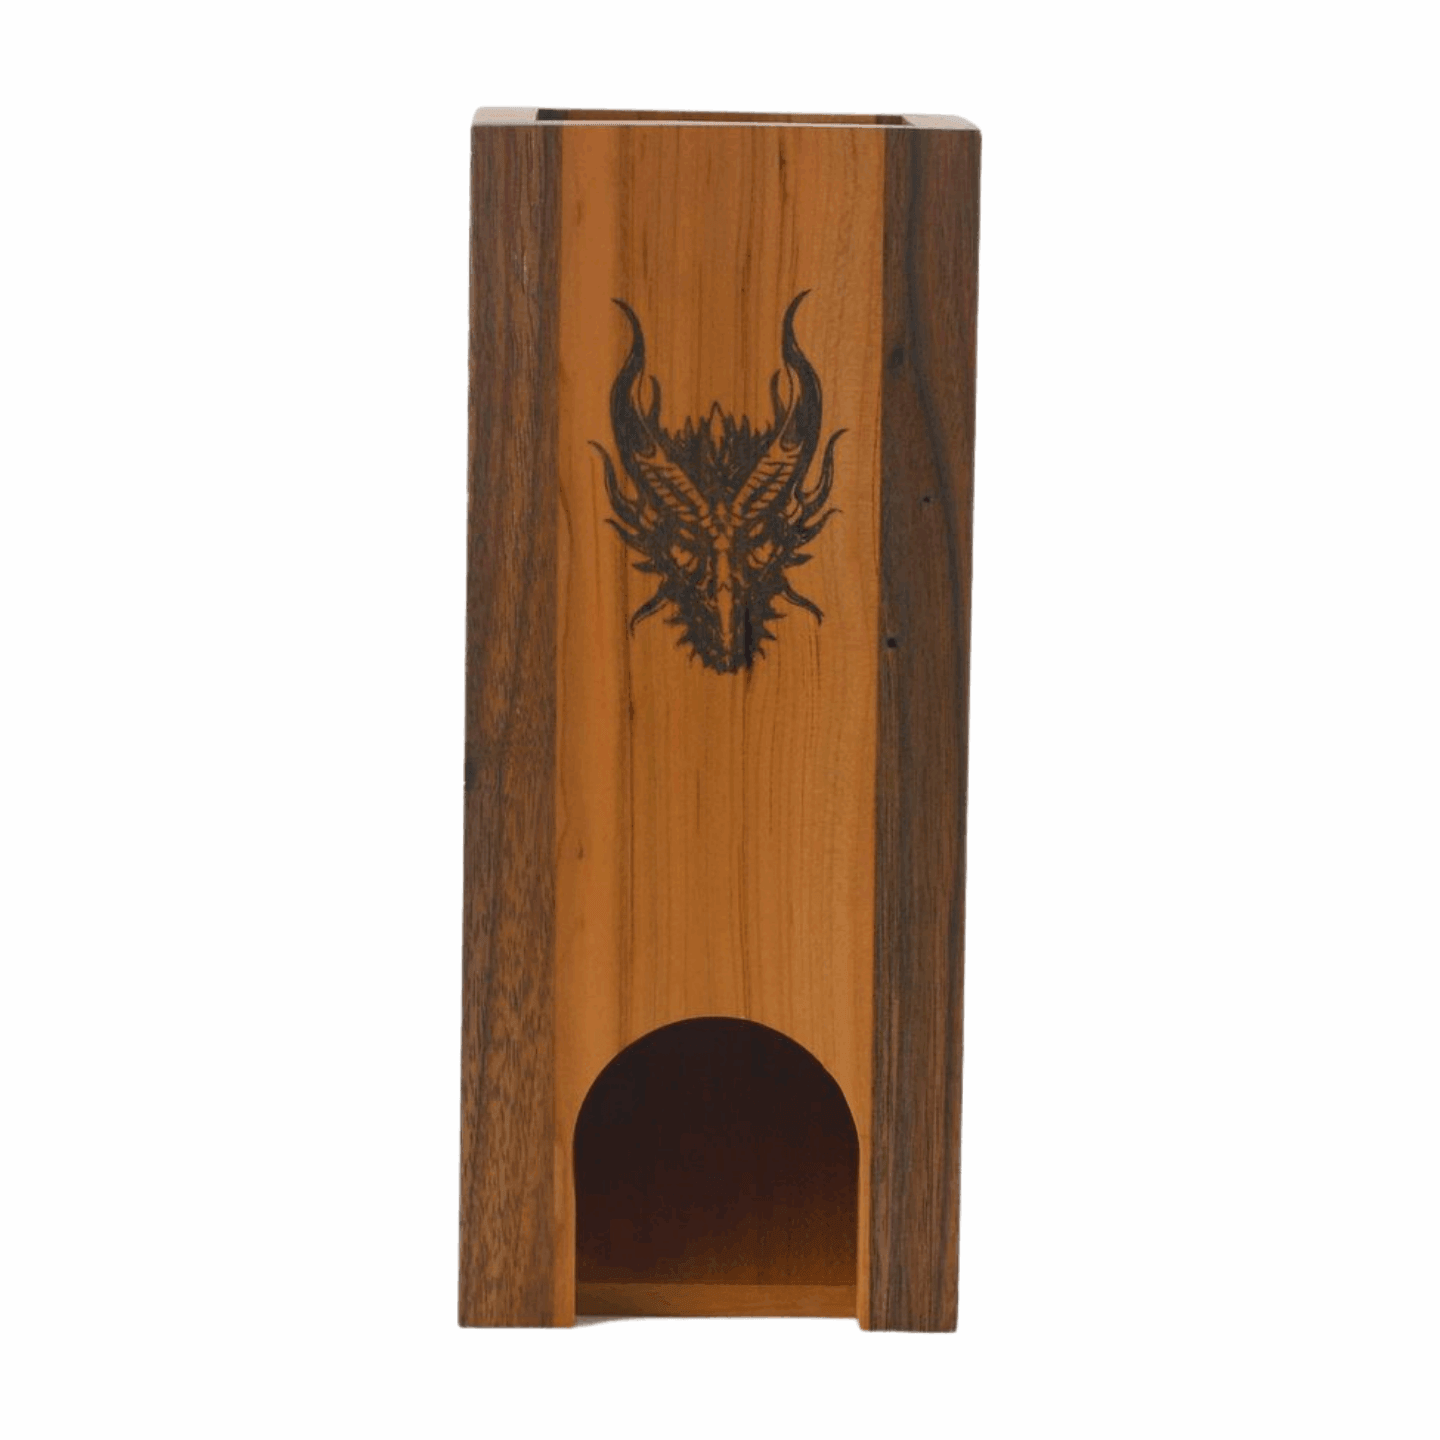 Cherry and Walnut Dice Tower with Dragon, Sword, and Knots Design - Dragon Armor Games